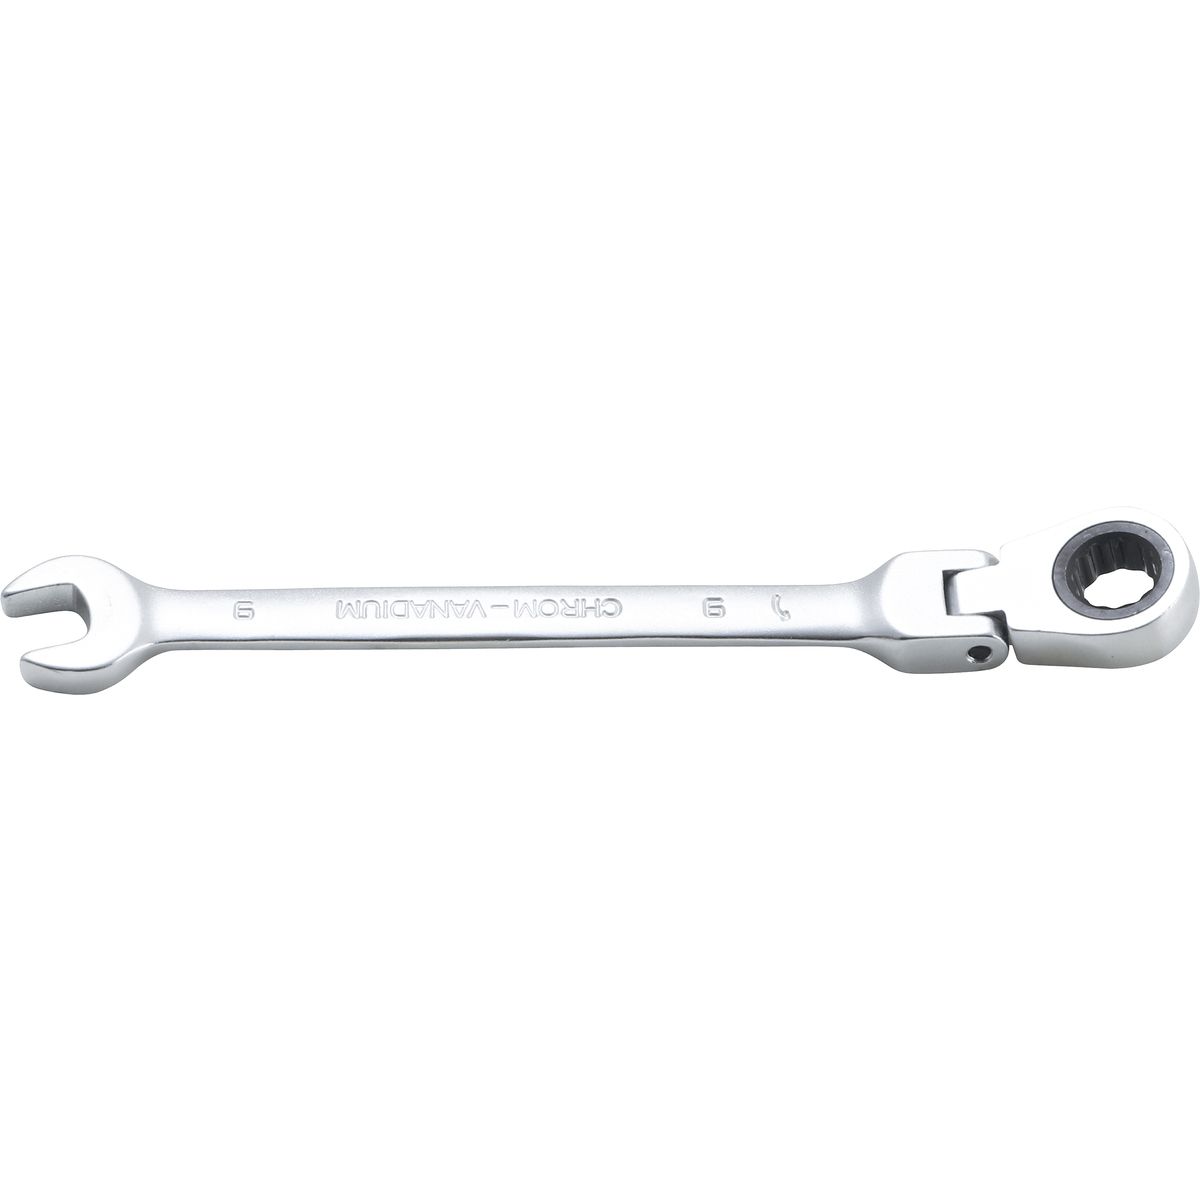 Ratchet Combination Wrench | adjustable | 9 mm